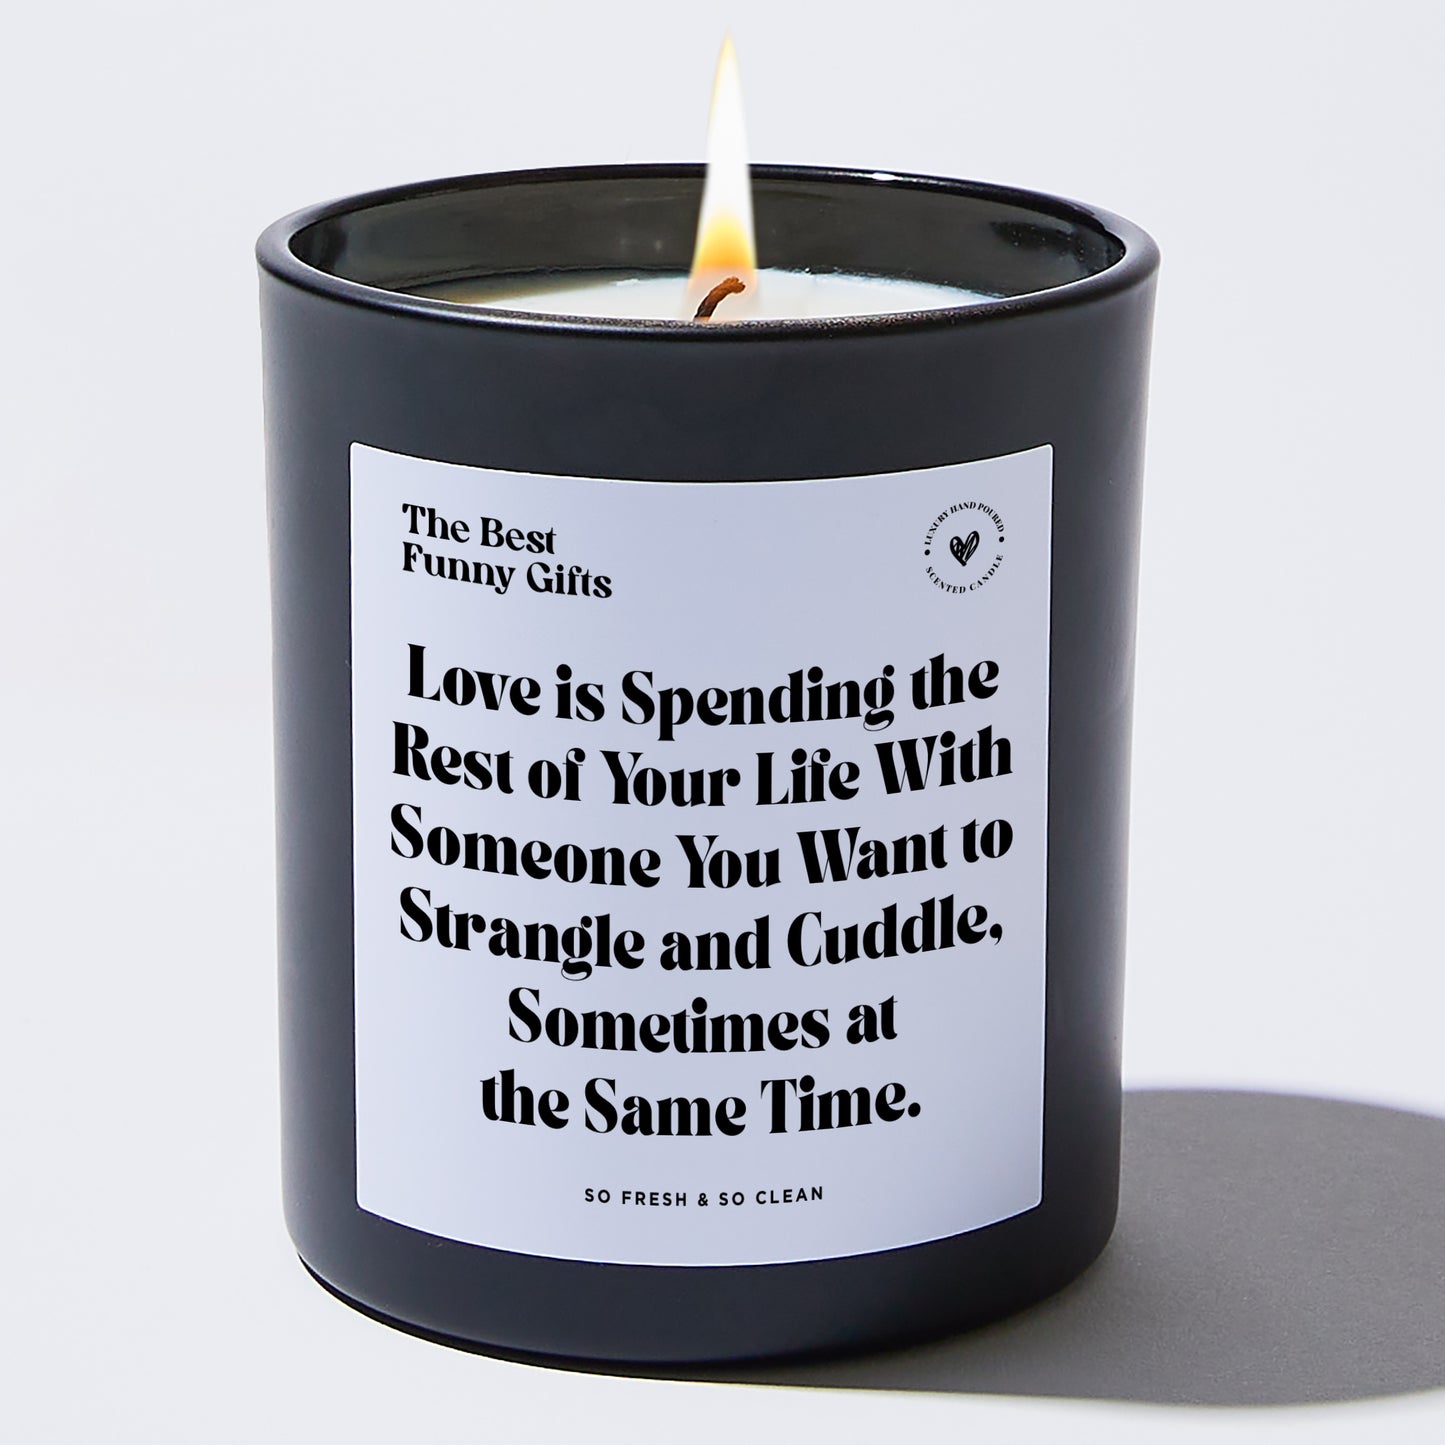 Anniversary Present - Love is Spending the Rest of Your Life With Someone You Want to Strangle and Cuddle, Sometimes at the Same Time. - Candle